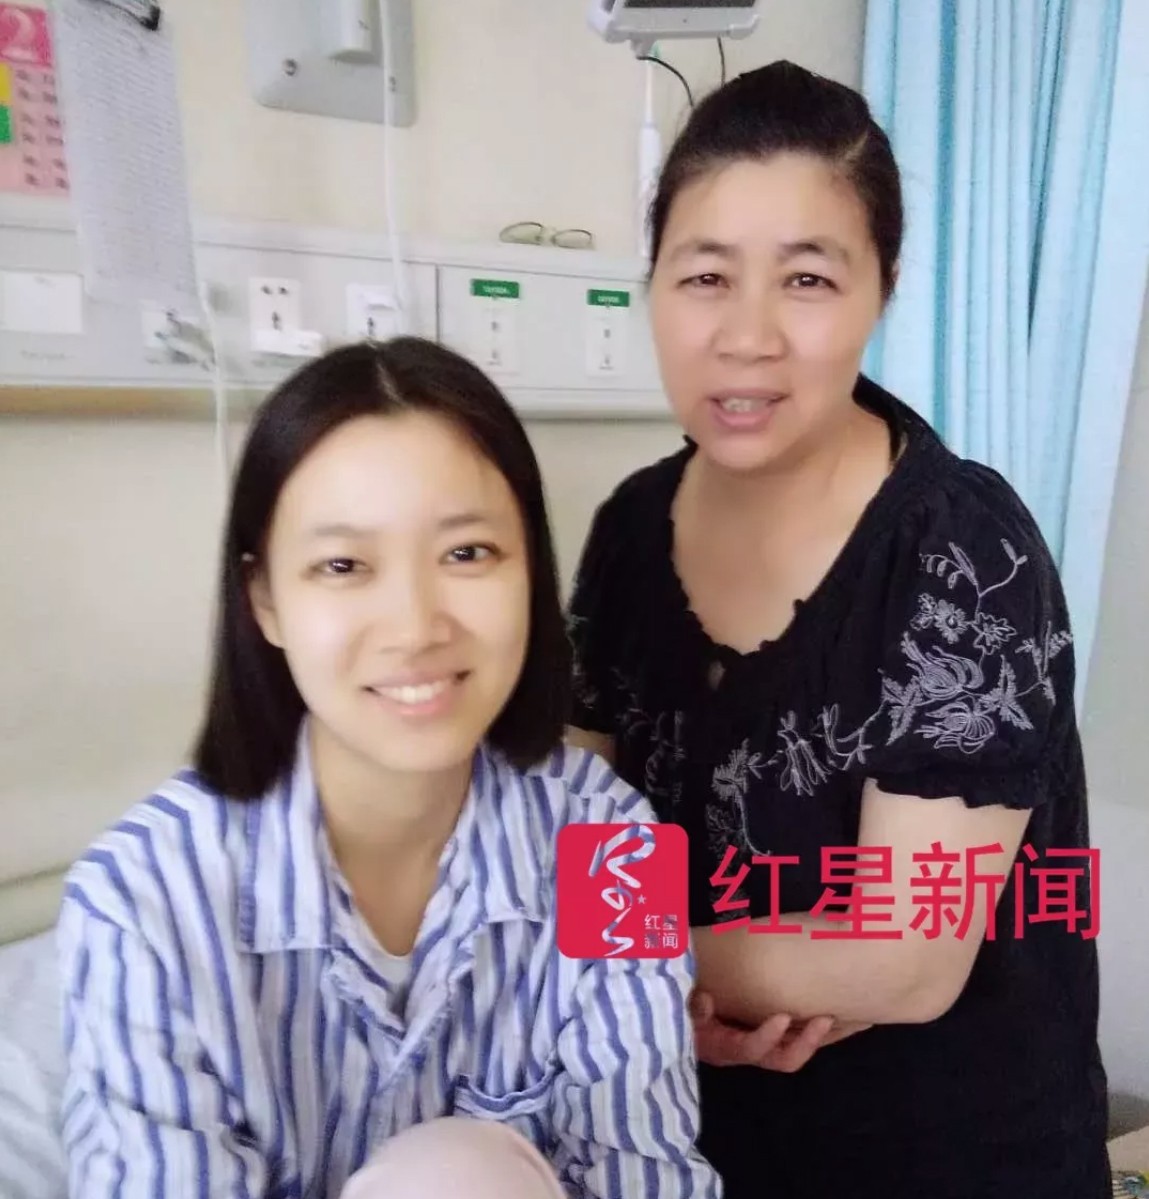 The mother of Zhang Rui (left), who died of leukaemia in June, has returned 430,000 yuan (US$63,000) in donations collected to pay for her daughter’s medical treatment. Photo: 163.com